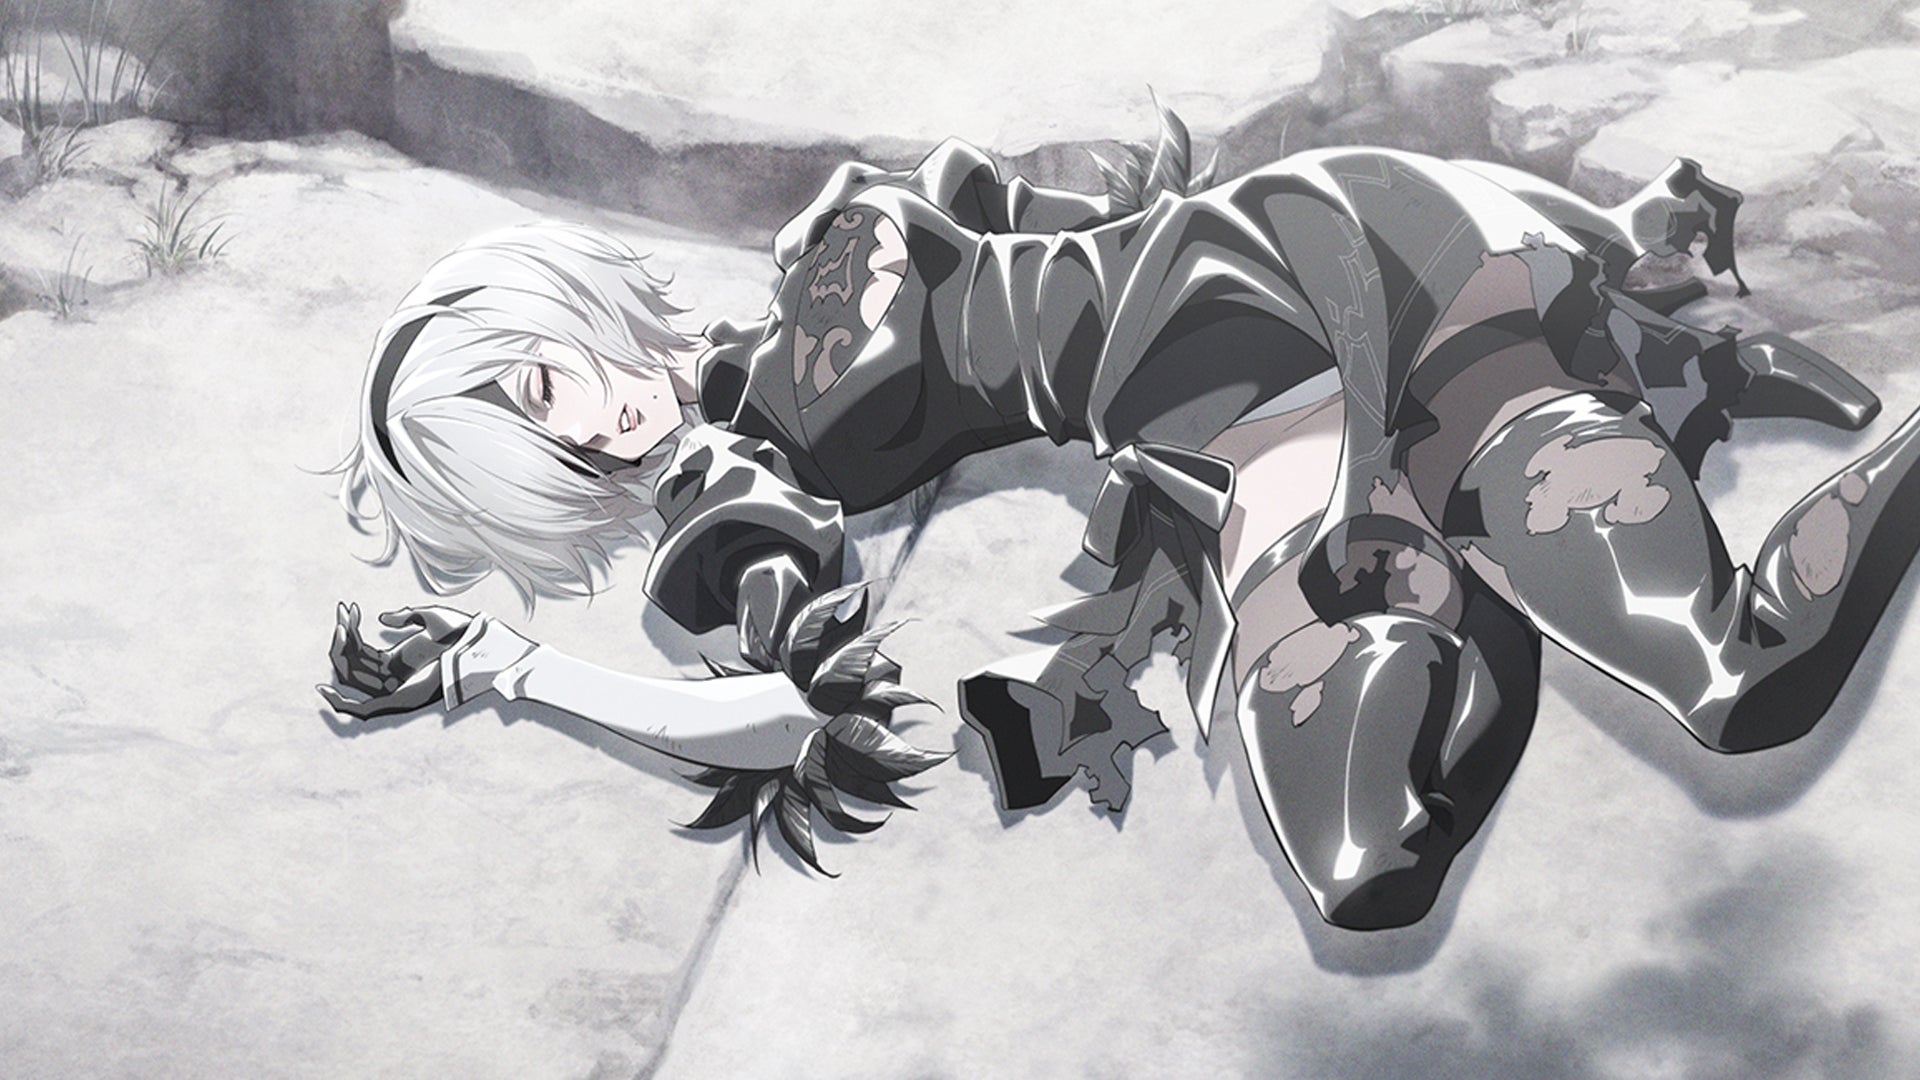 Wallpaper Anime, Nier, Game, Kaine for mobile and desktop, section прочее,  resolution 3000x1875 - download